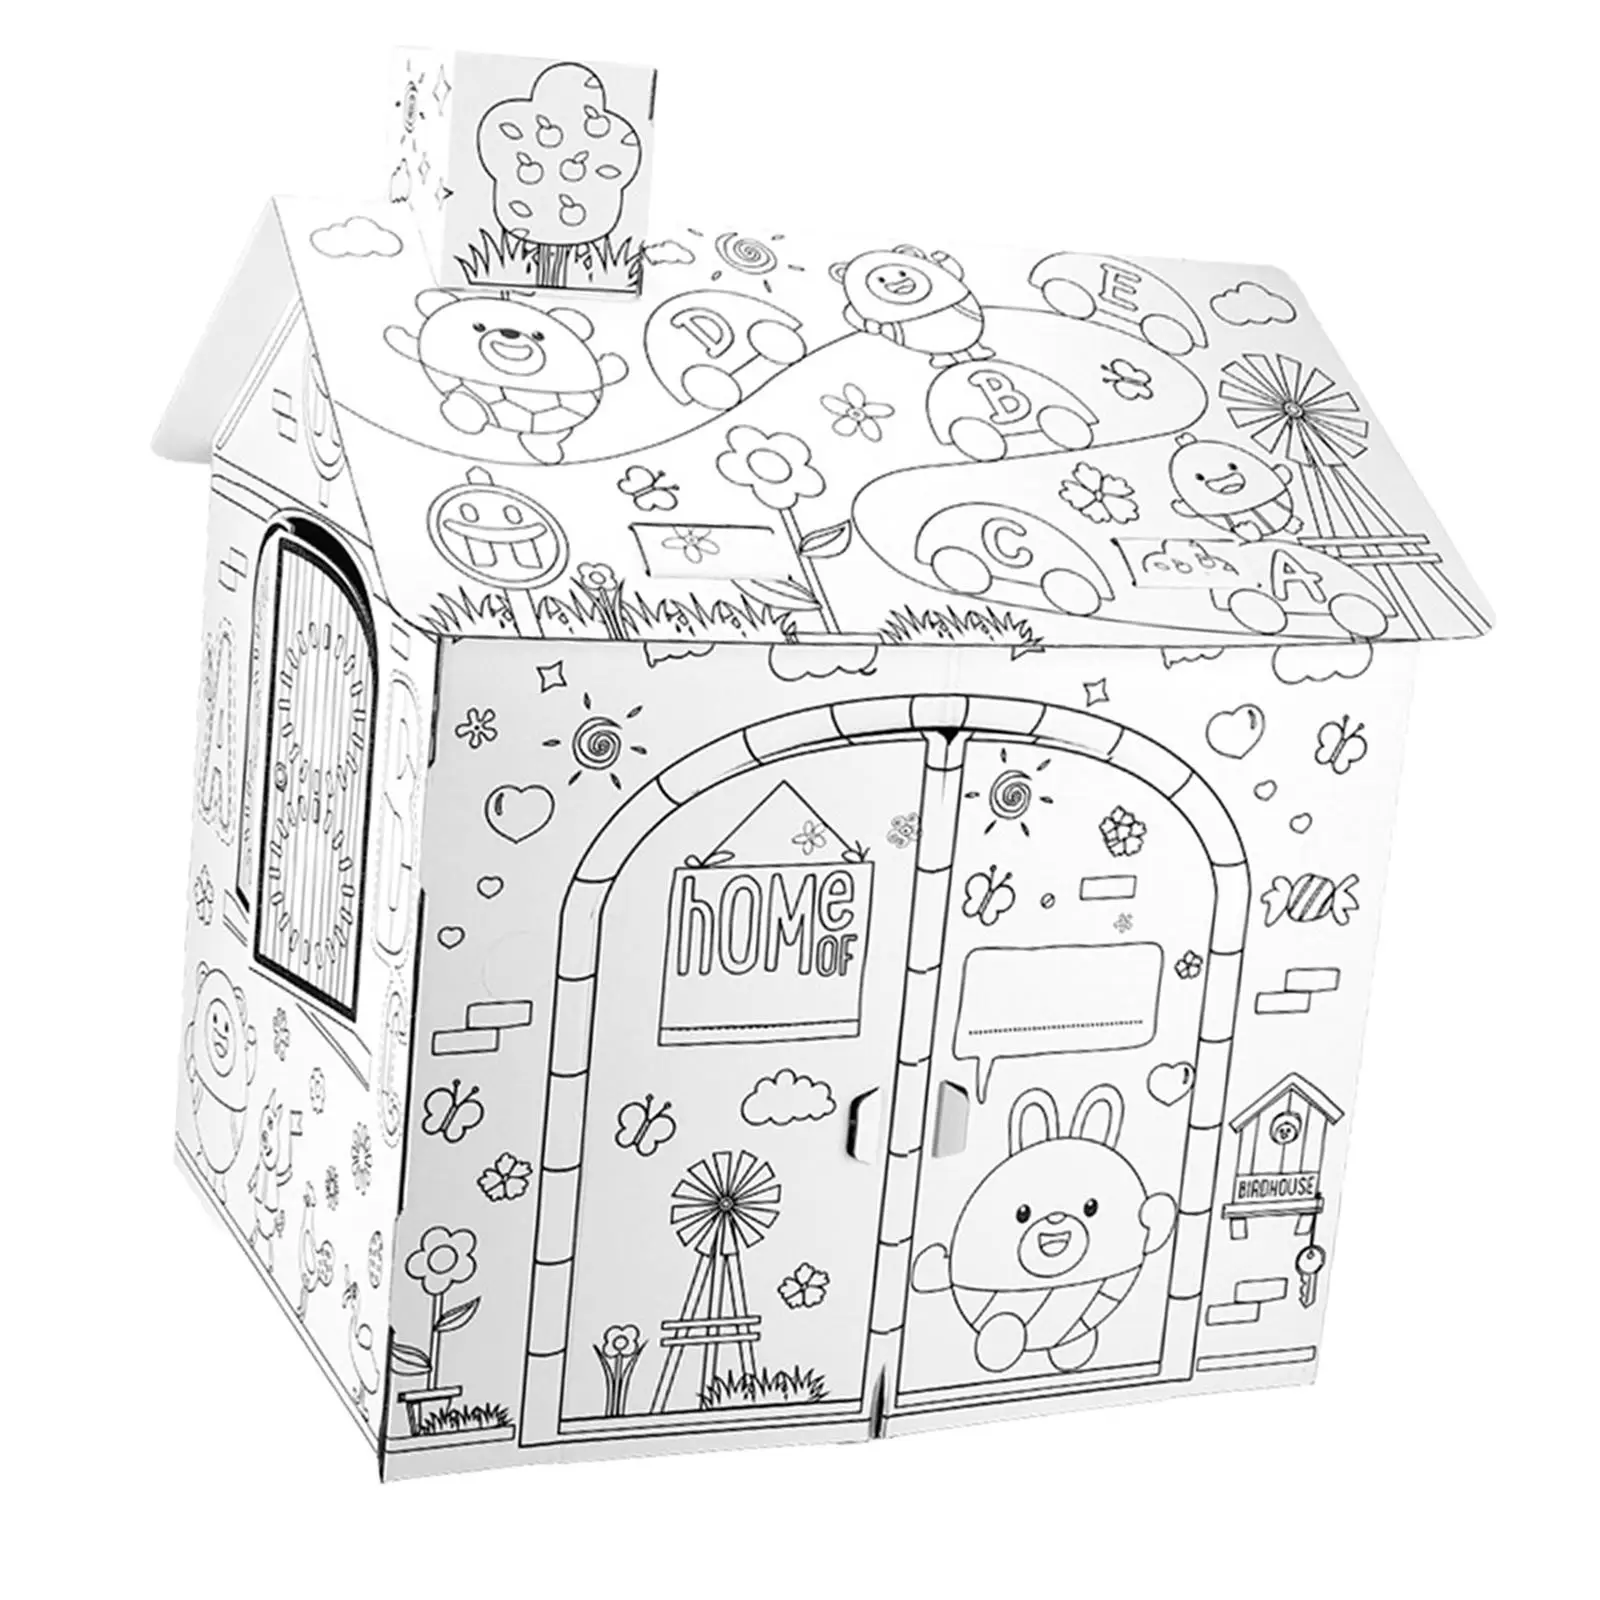 Paper Cardboard Playhouse Indoor Fun Paper Craft Kits Creative Arts with Color